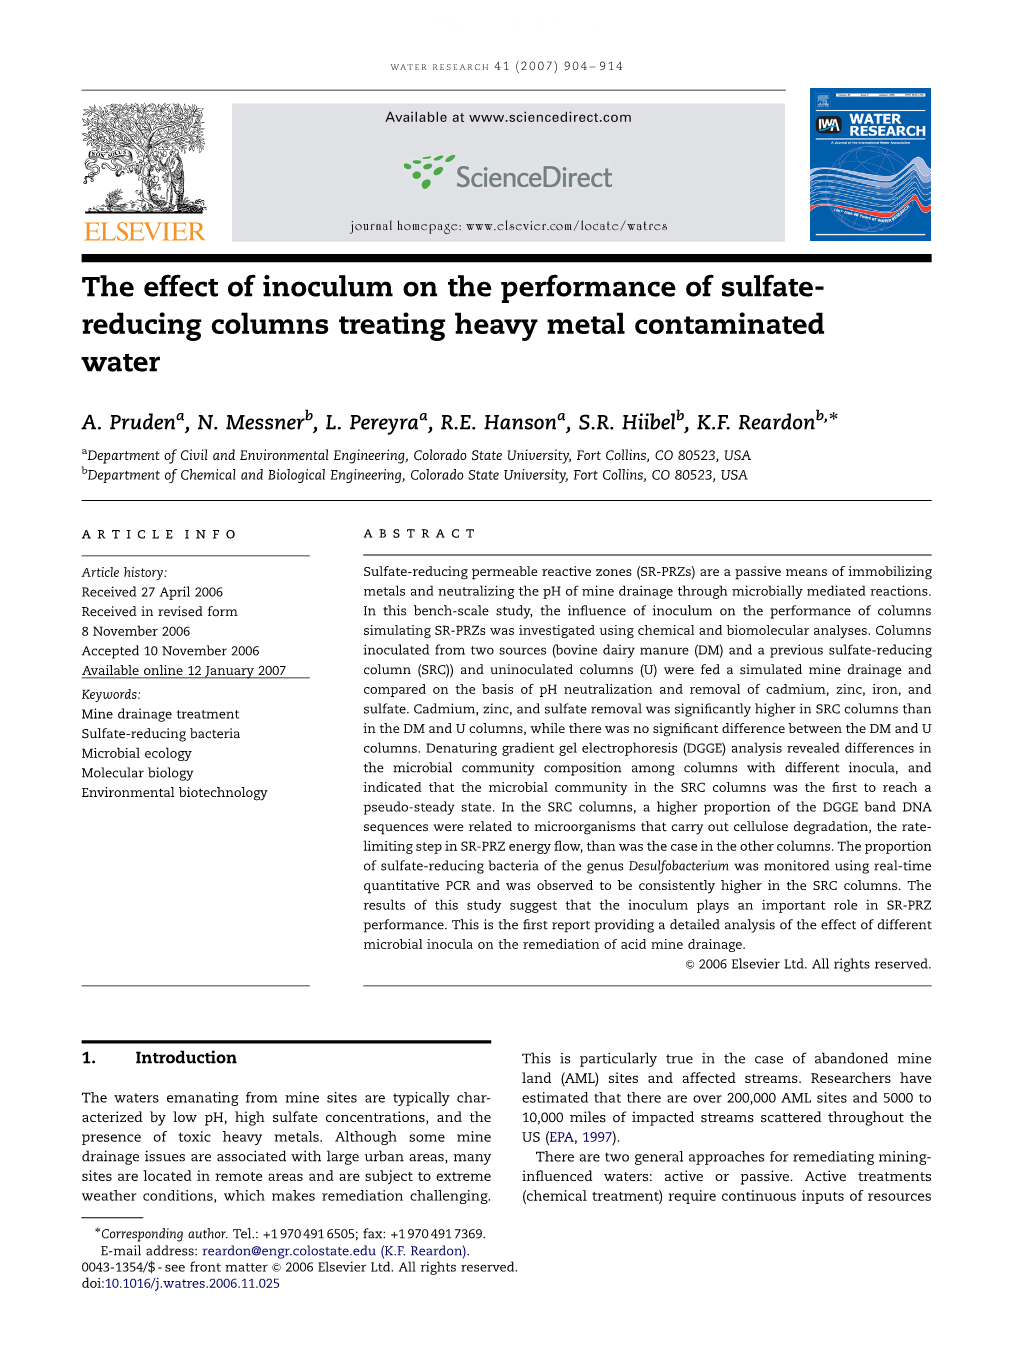 The Effect of Inoculum on the Performance of Sulfatereducing